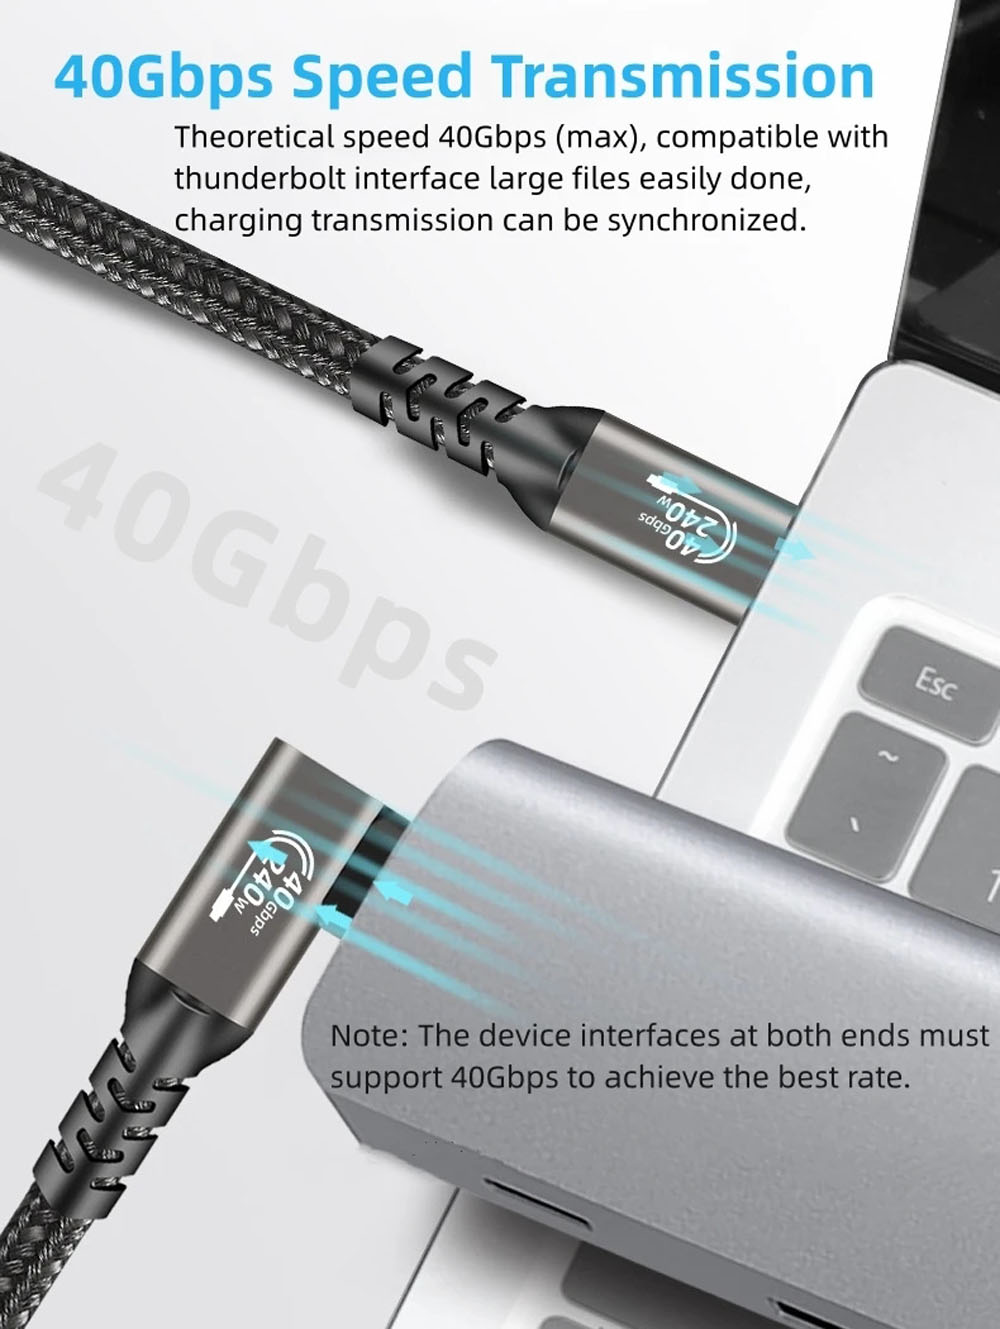 Right Angle USB4.0 USB C to USB C Cable, USB C 4.0 Gen3 Cable 1.5